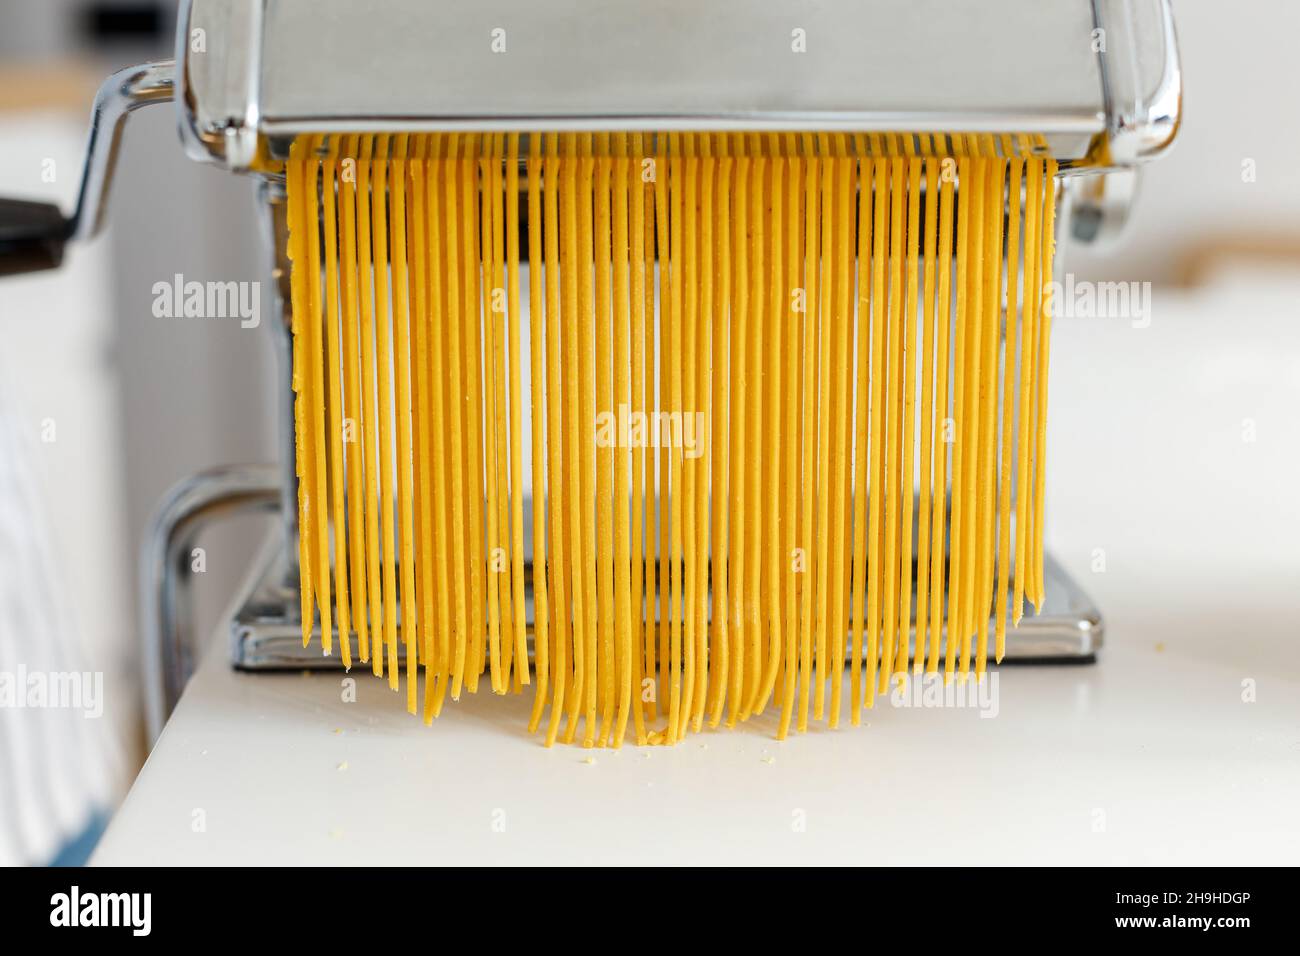 https://c8.alamy.com/comp/2H9HDGP/man-in-apron-making-spaghetti-with-noodle-cutter-close-up-pasta-cooking-at-home-preparing-food-from-bright-yellow-dough-2H9HDGP.jpg